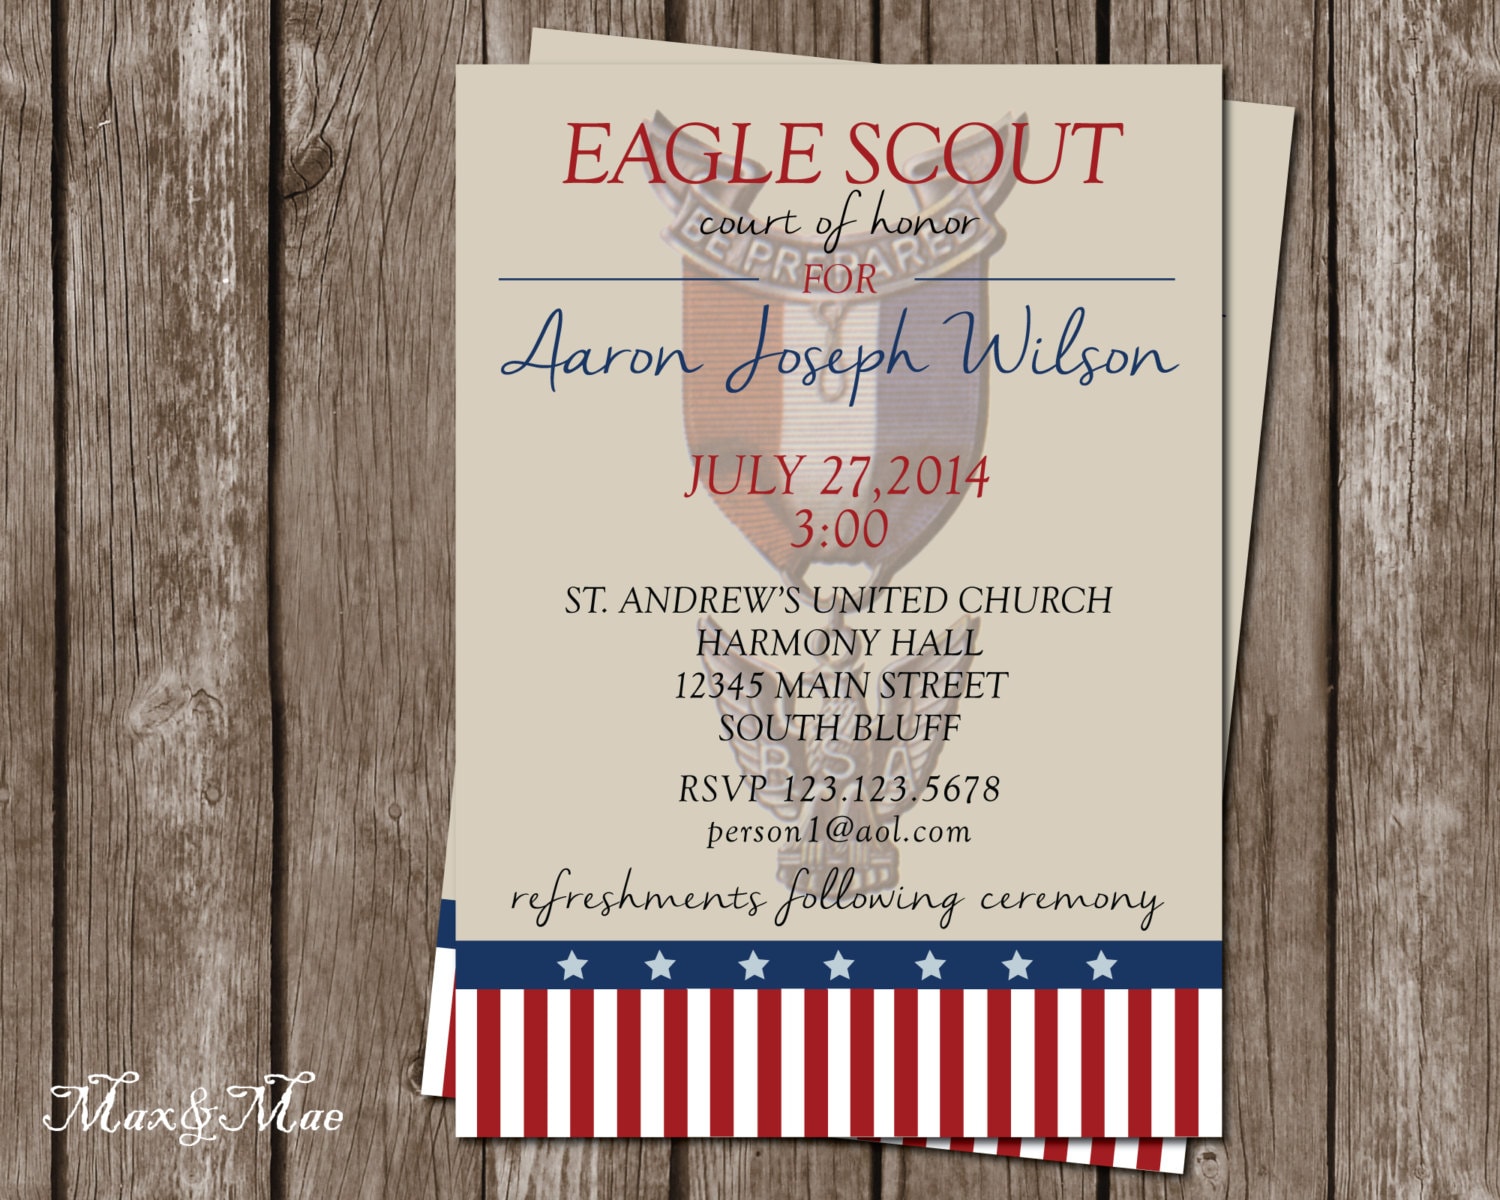 eagle-scout-court-of-honor-invitations-by-itsallaboutthecards